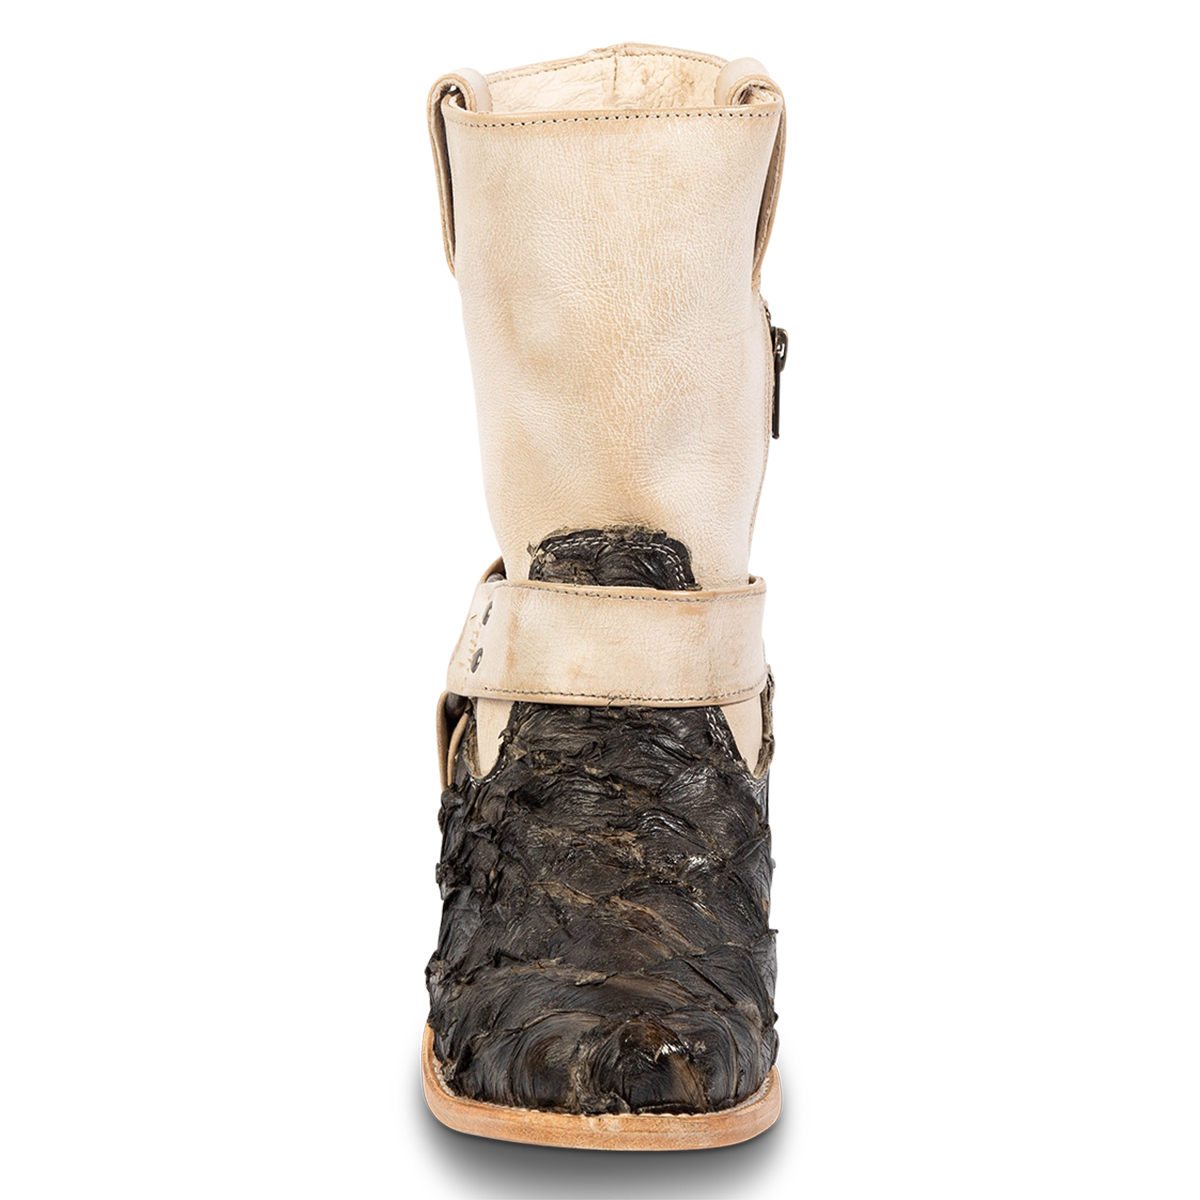 Front view showing FREEBIRD women's Darcy beige multi fish leather boot with a studded ankle harness, leather pull straps, an inside zip closure and a square toe